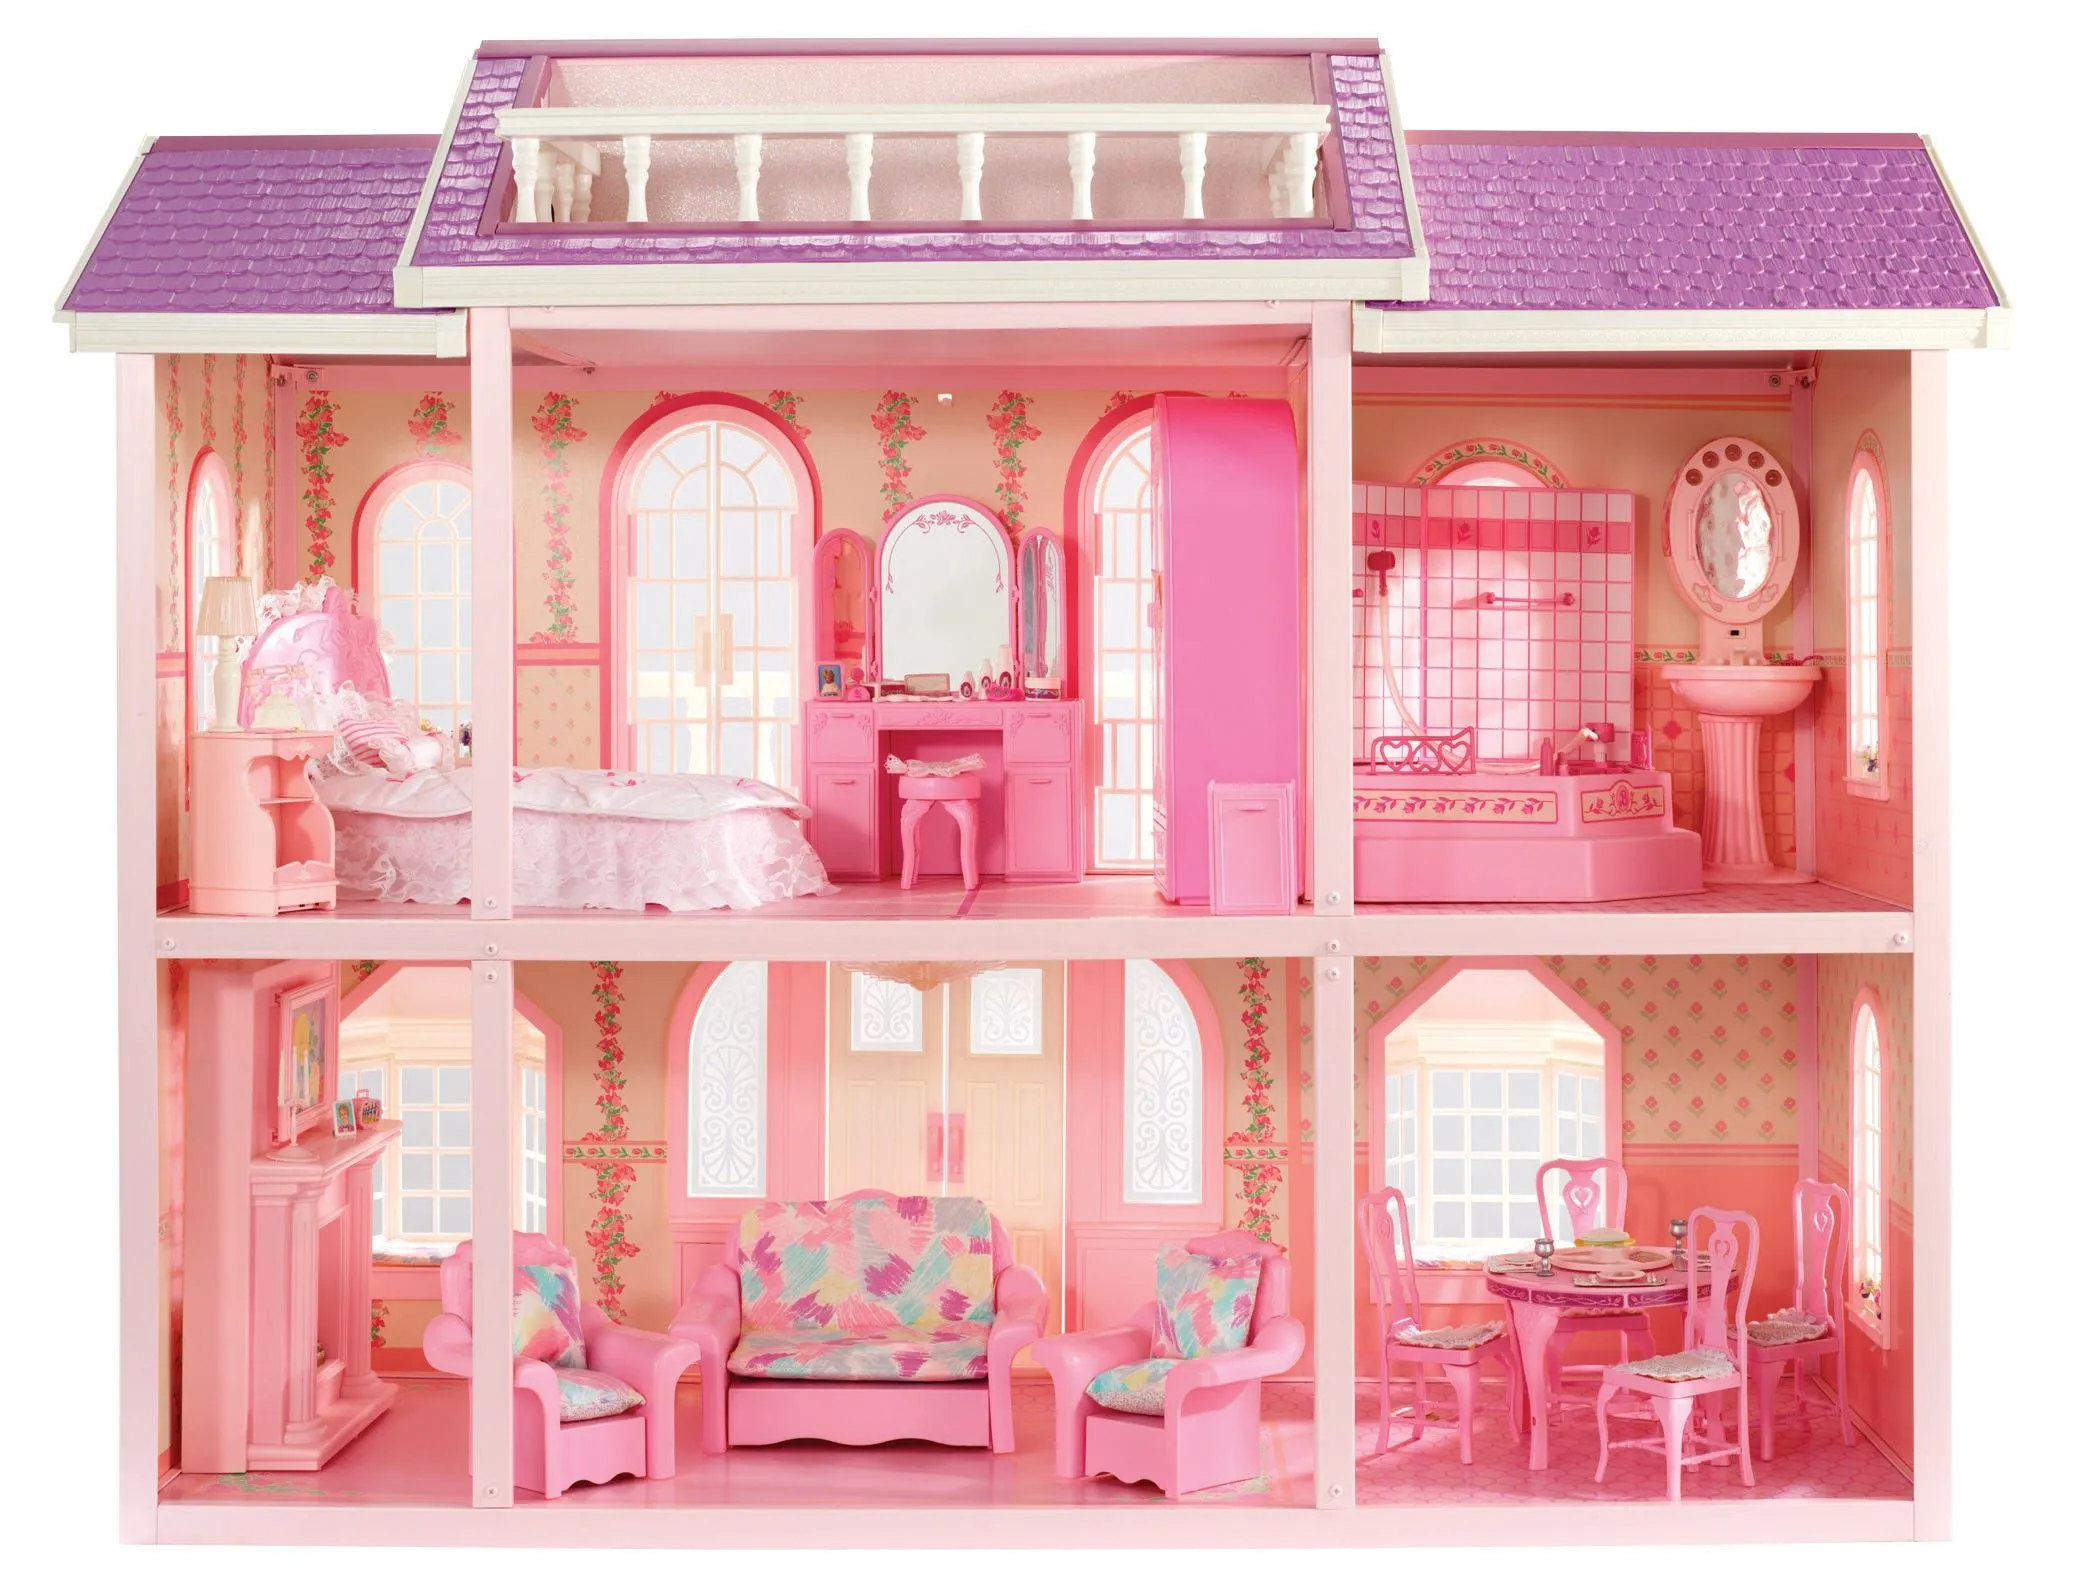 That's a lotta pink: Peek at Barbie's new Dreamhouse